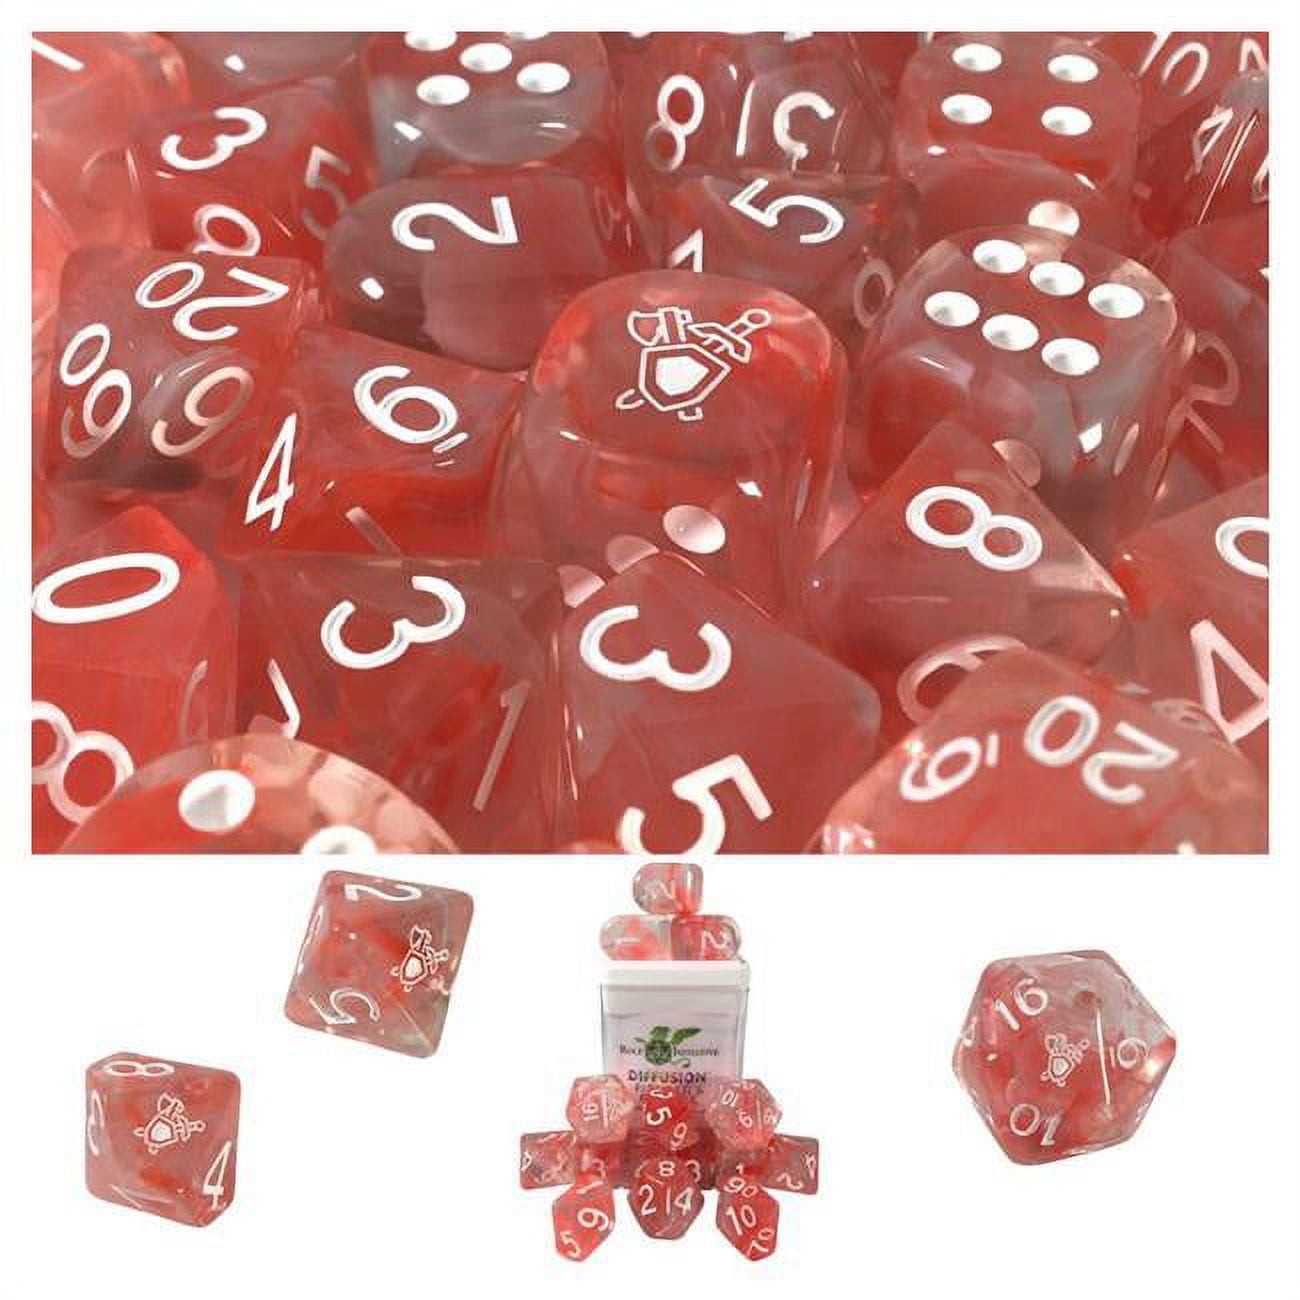 Picture of Role 4 Initiative R4I50525-FC-S Diffusion Fighters Resolve Special Reserve Dice, Set of 15